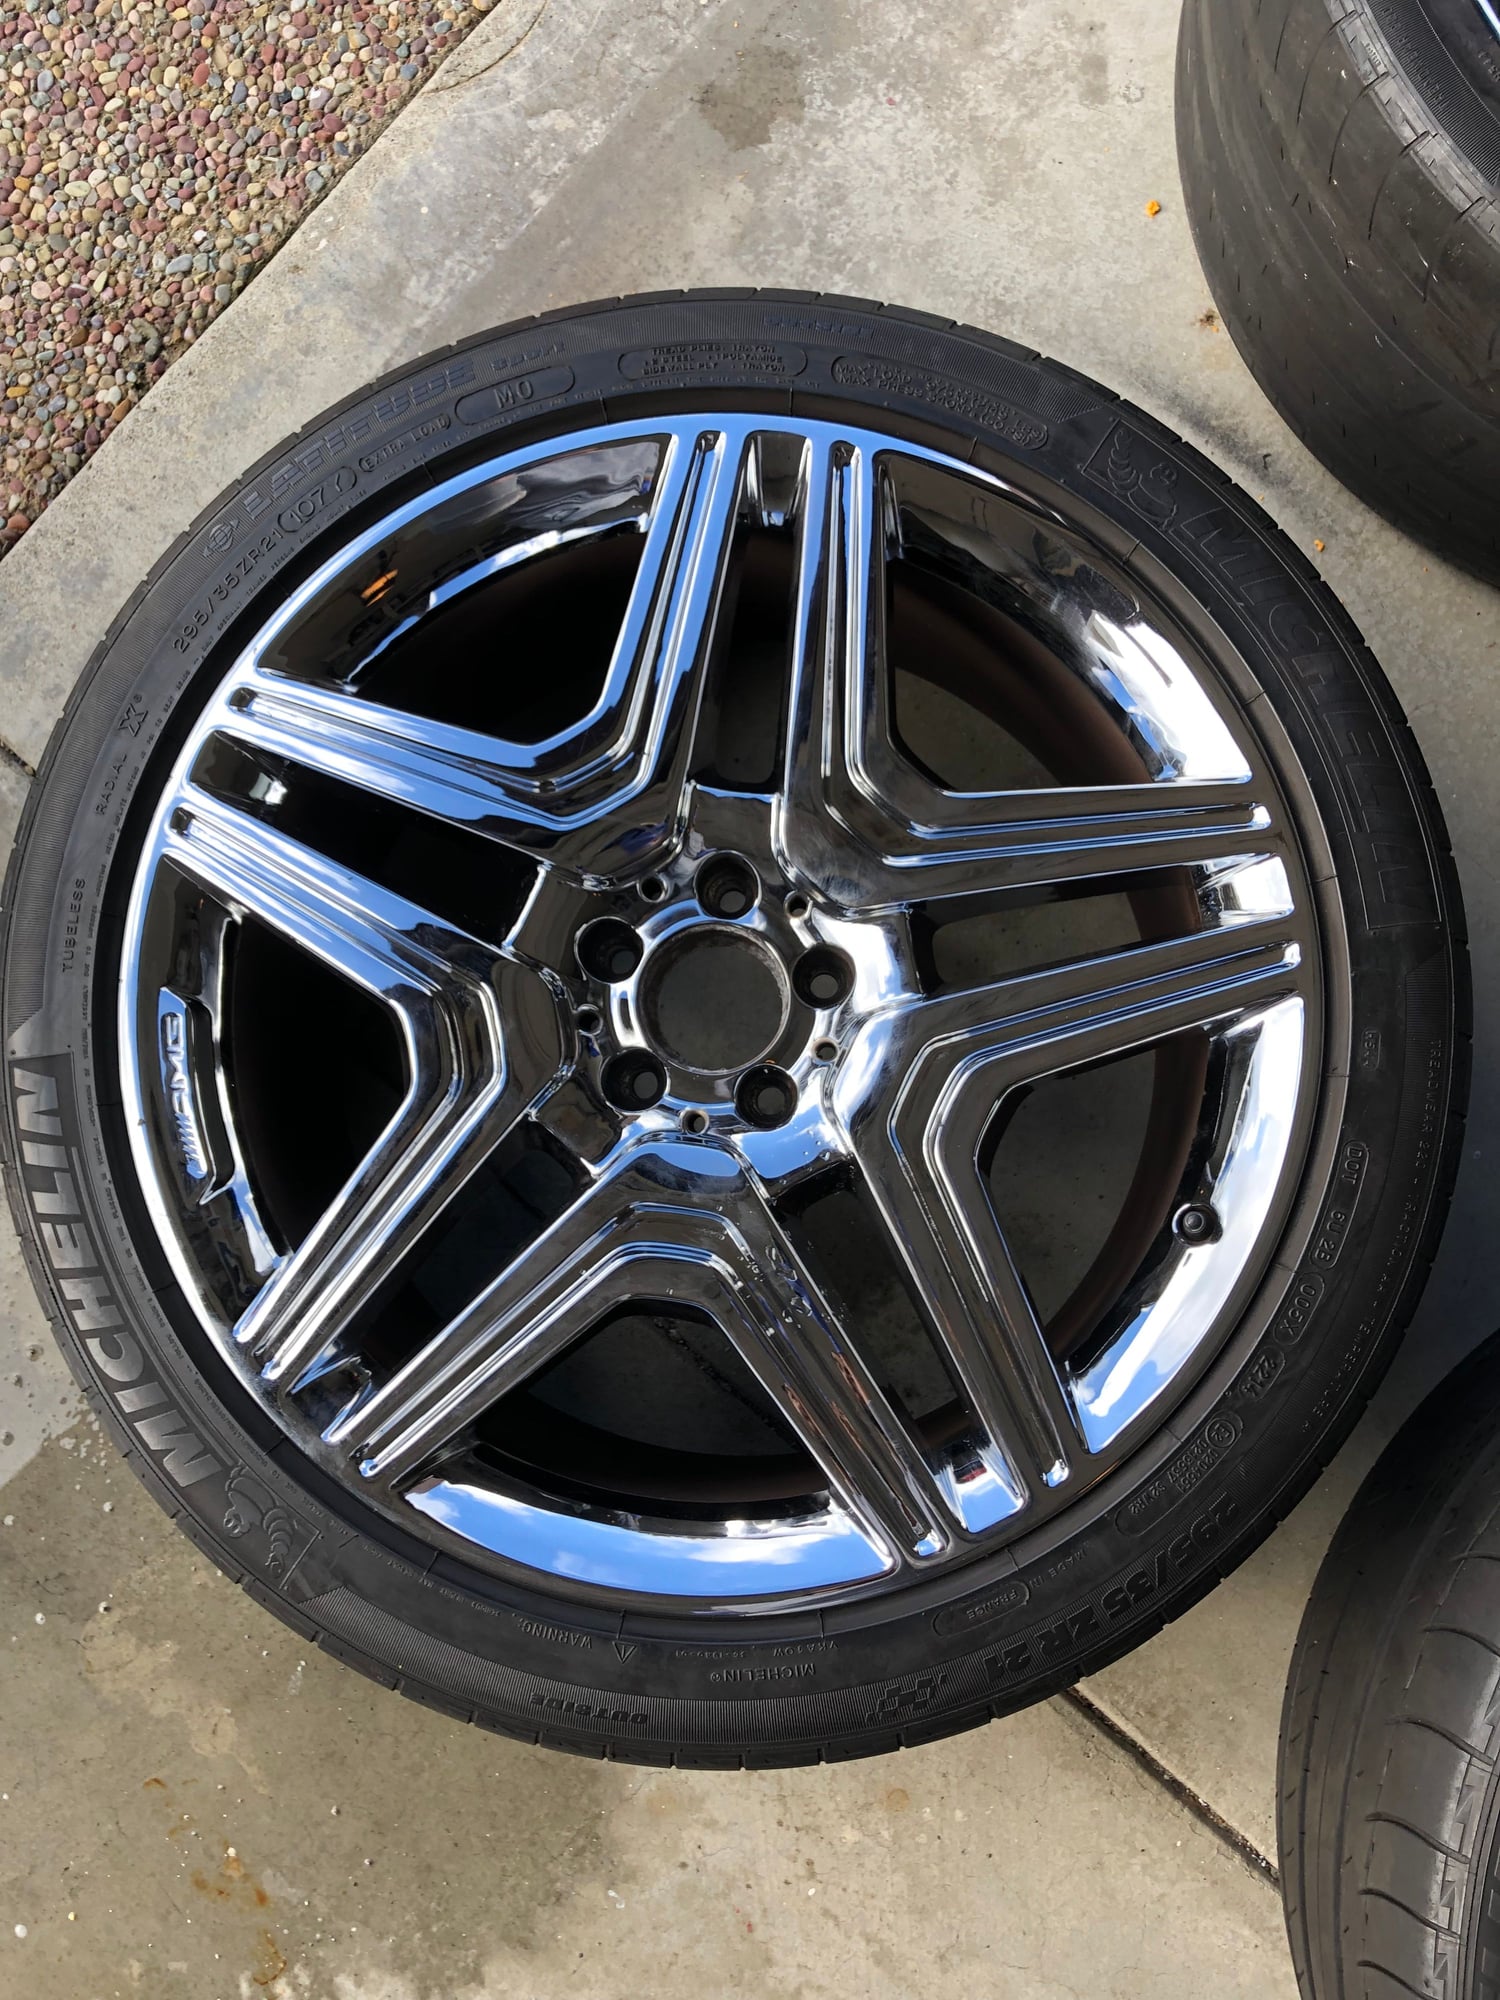 Wheels and Tires/Axles - FS: OEM chrome ML63 wheels - Used - Foster City, CA 94404, United States